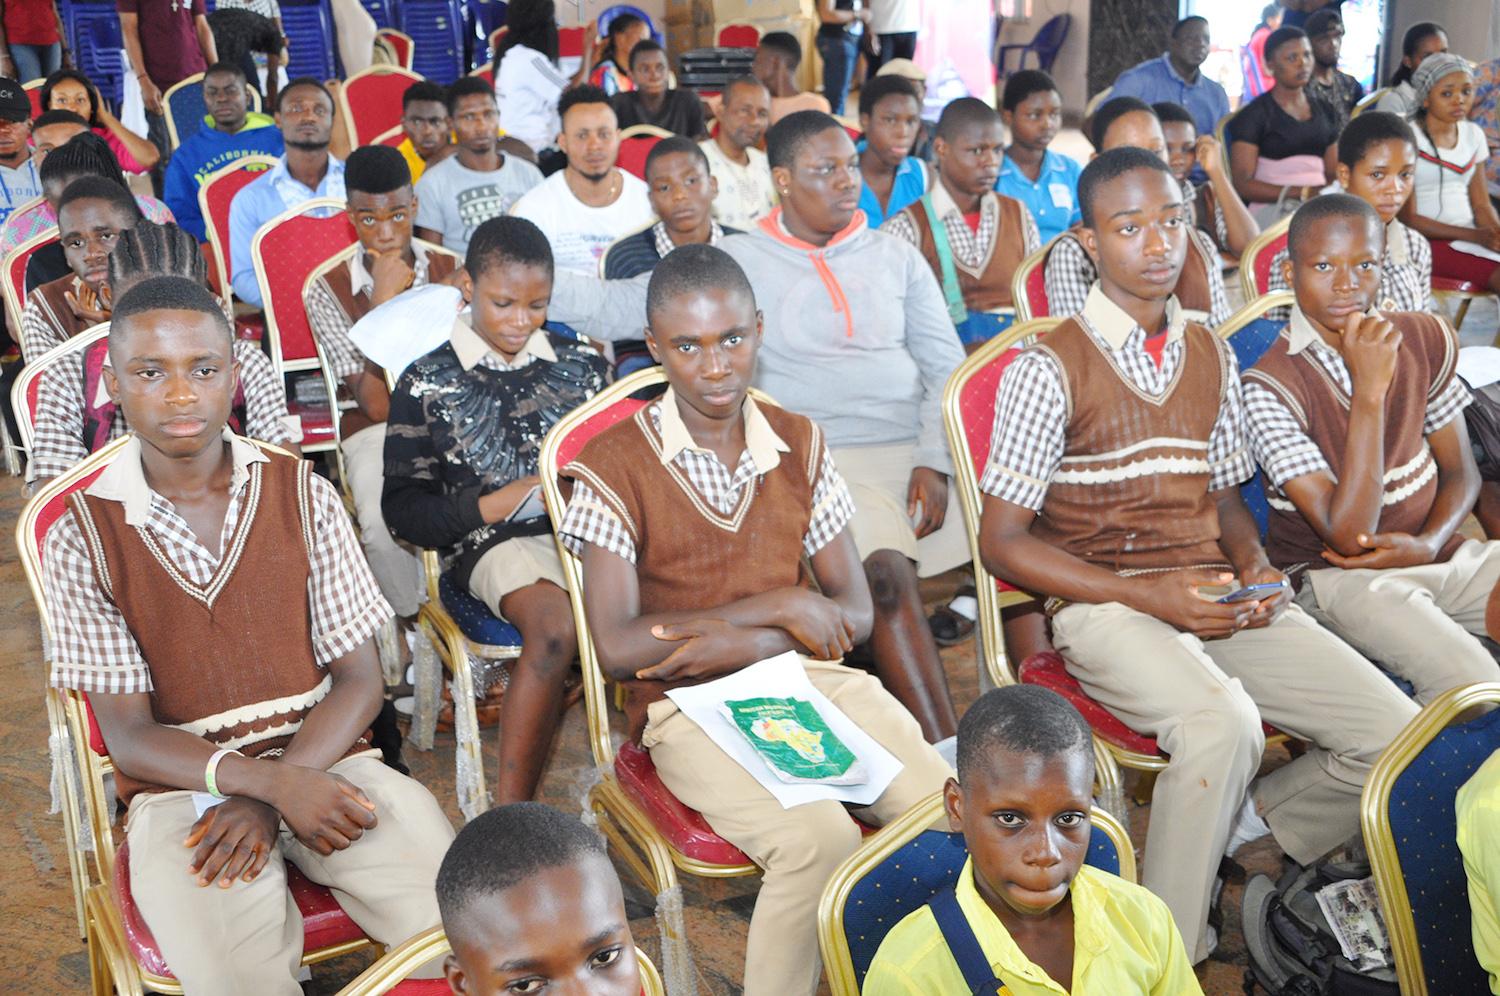 Girl-child education: A cheery intervention by Maritime Academy